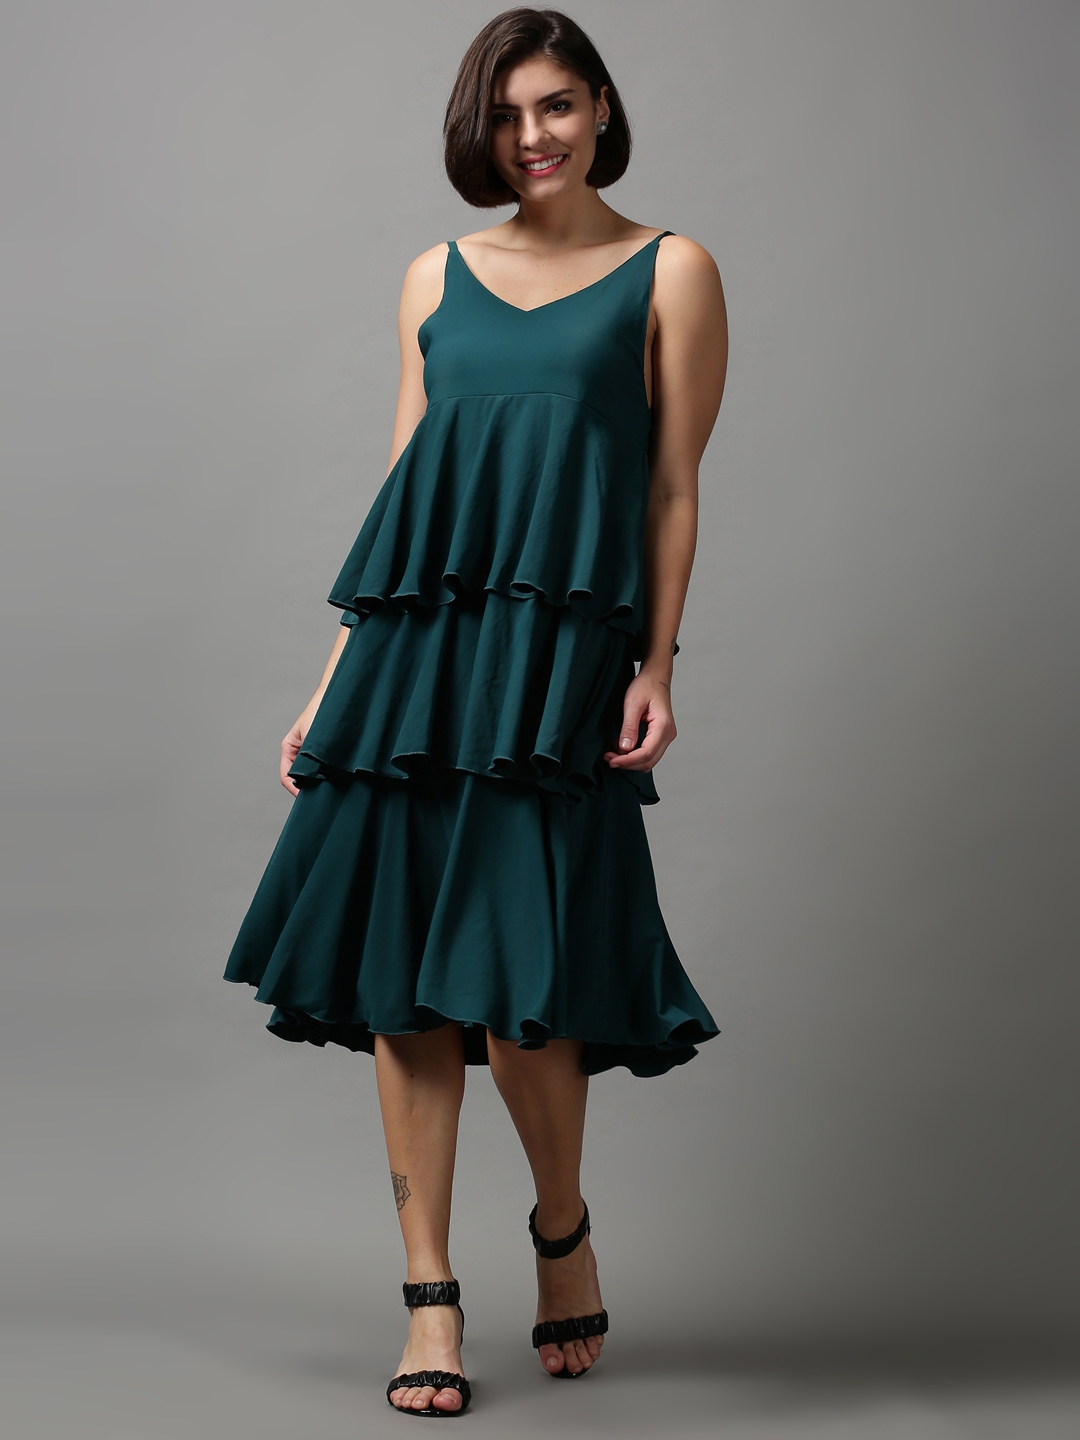 Women's Green Polyester Solid Dresses